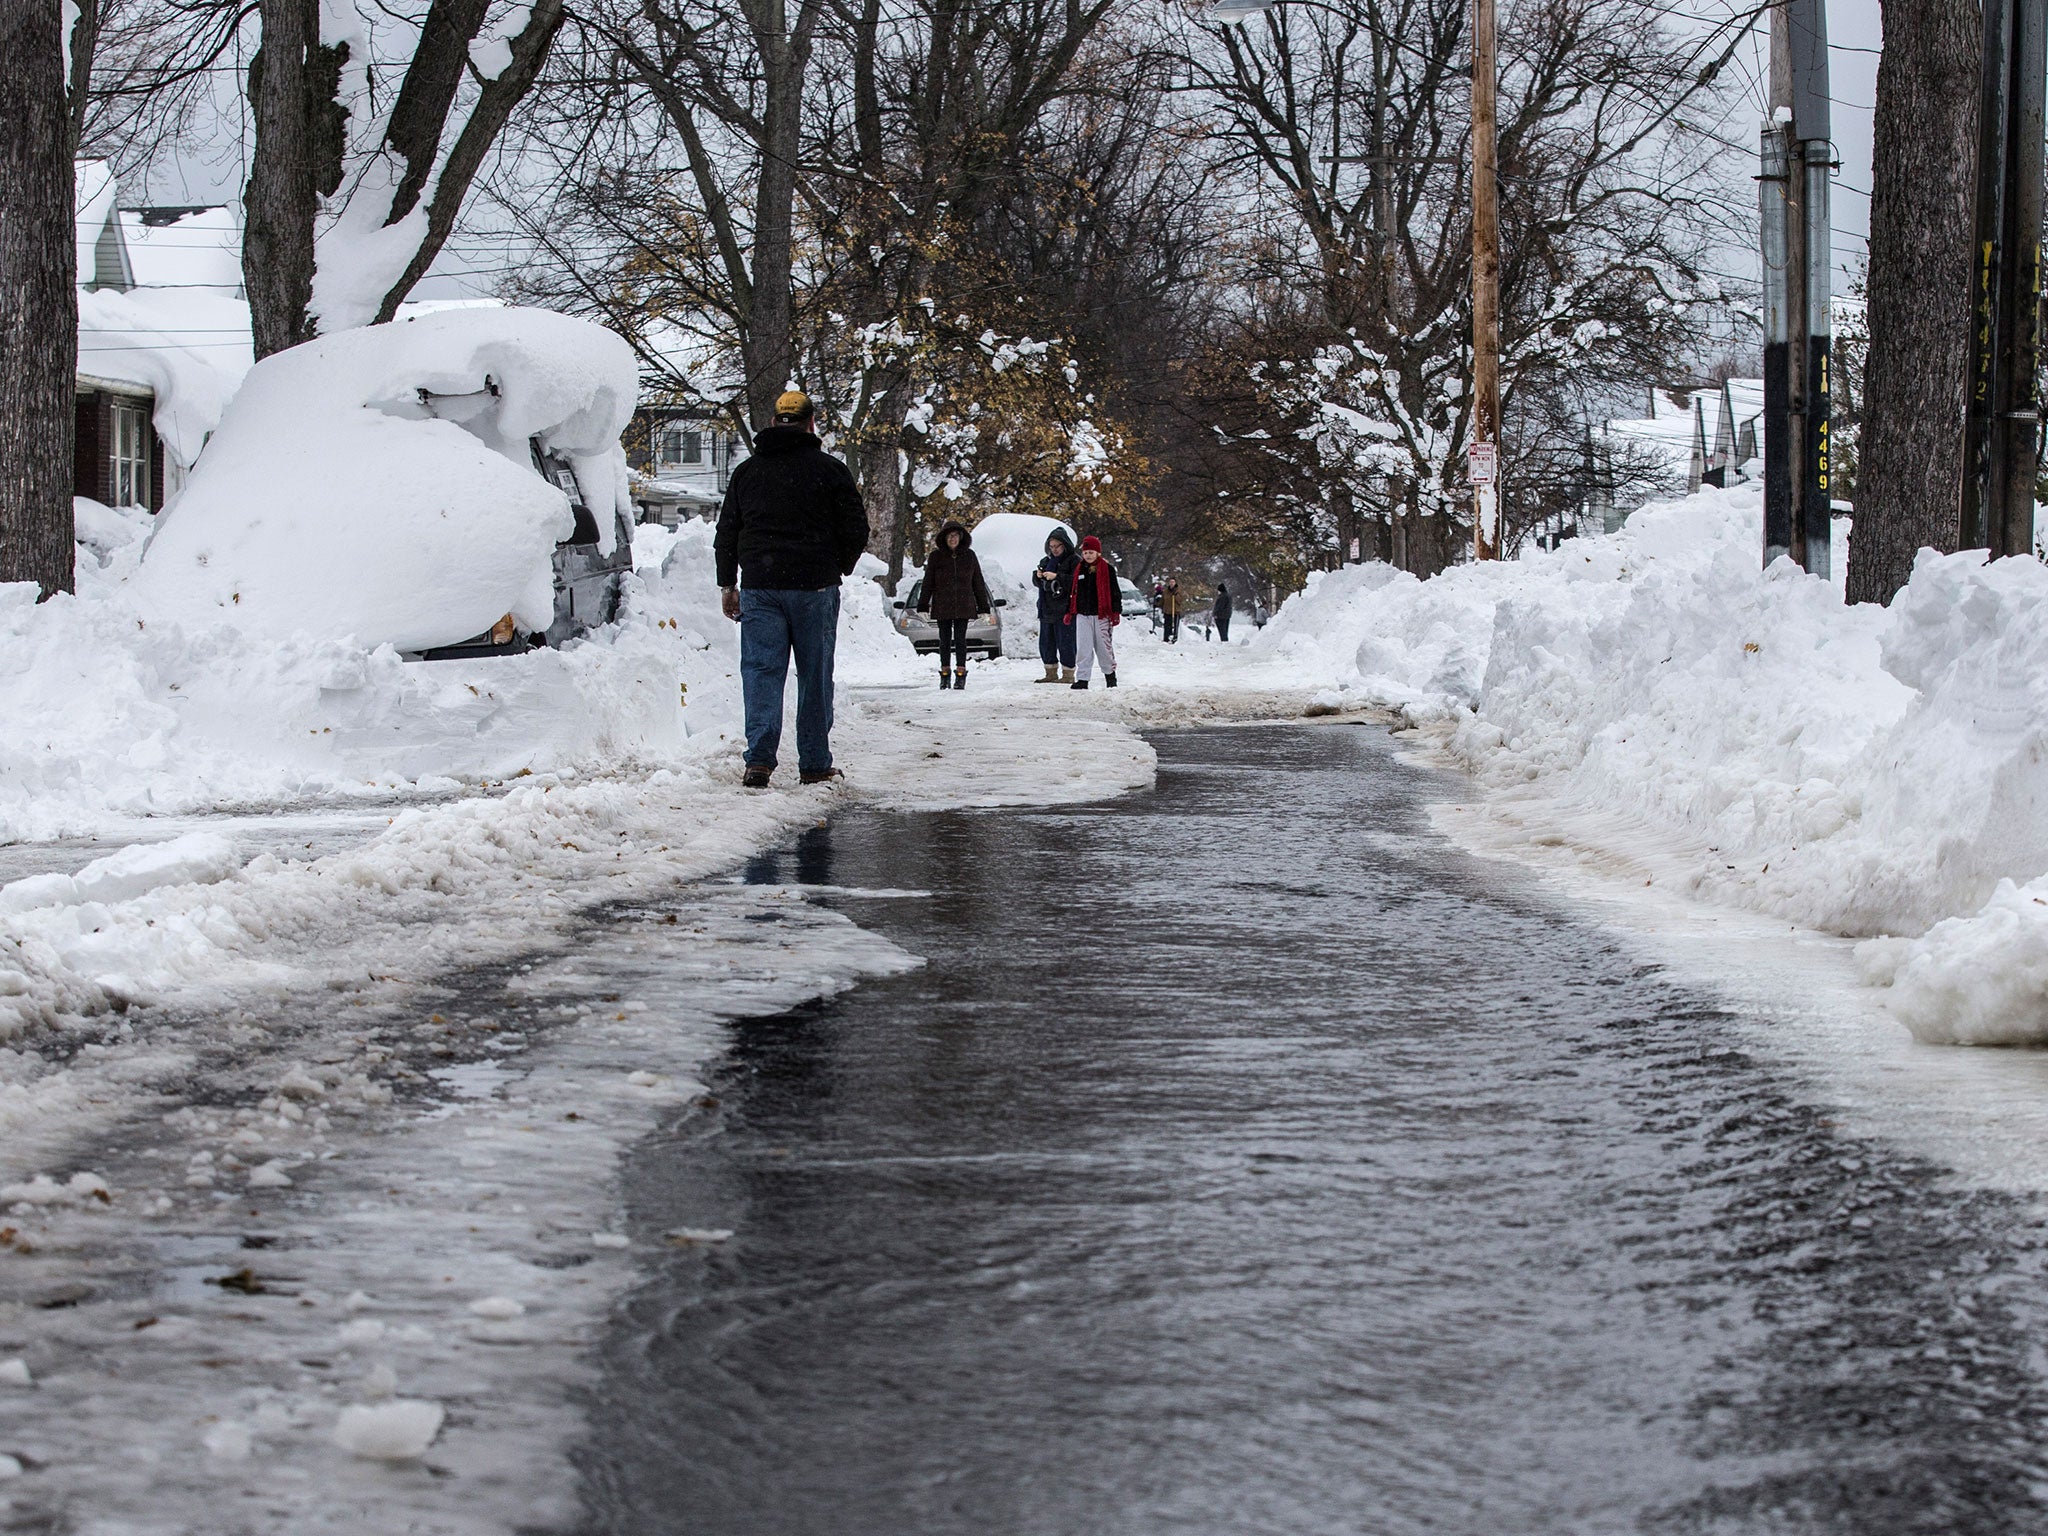 People walk down a street flowing with water after a water main broke in Buffalo, New York November 22, 2014. Warm temperatures and rain were forecast for the weekend in the city of Buffalo and western New York, bringing the threat of widespread flooding